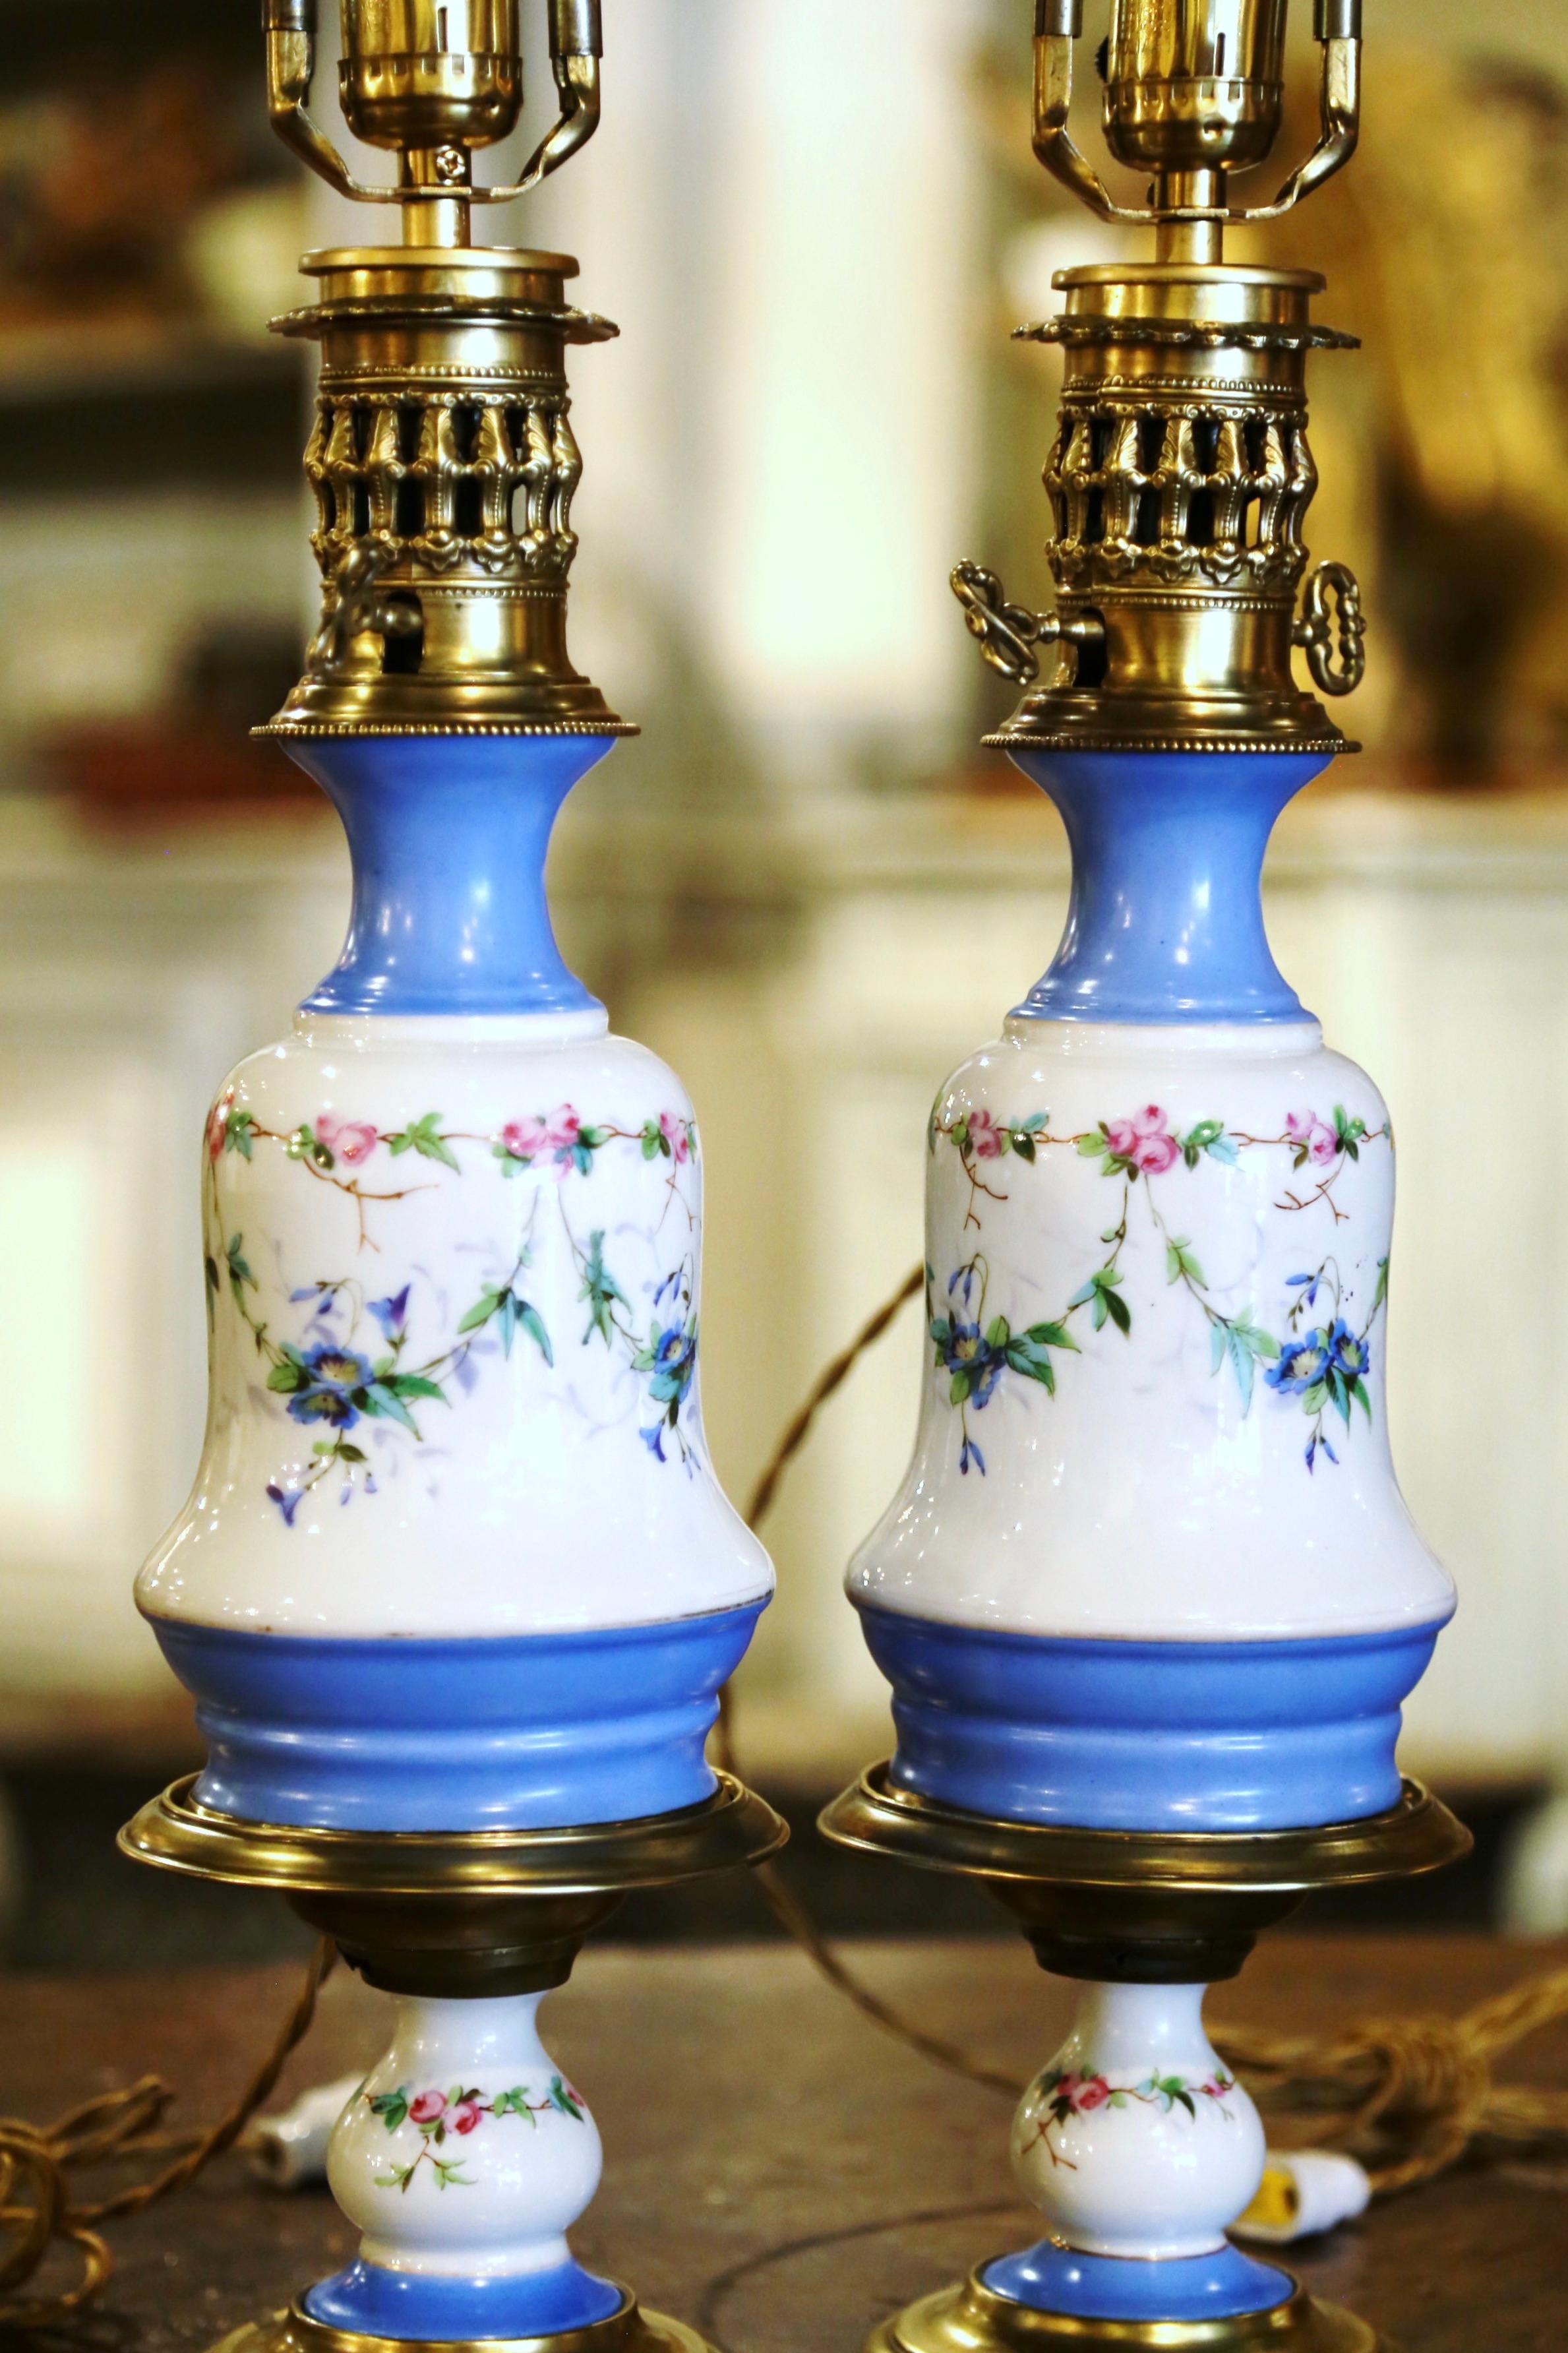 Napoleon III Pair of 19th Century French Porcelain & Brass Table Oil Lamps with Floral Motif For Sale